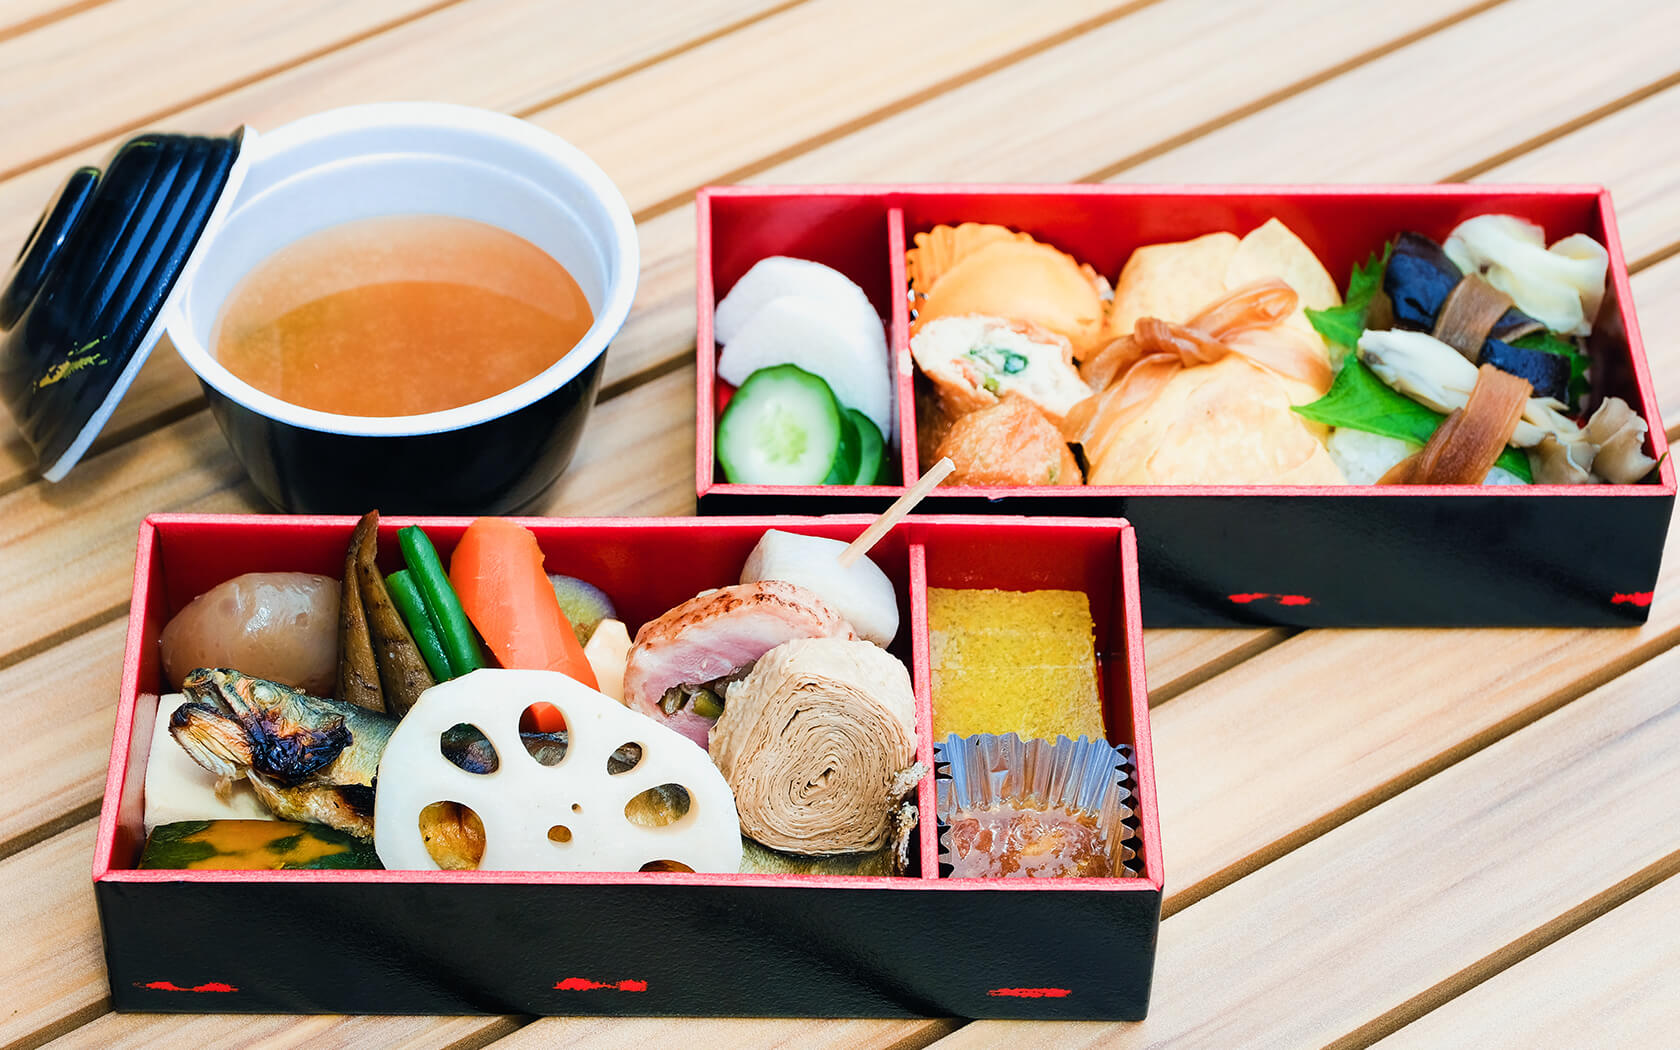 two bento boxes with food and vegetables found in the traditional Japanese cuisine